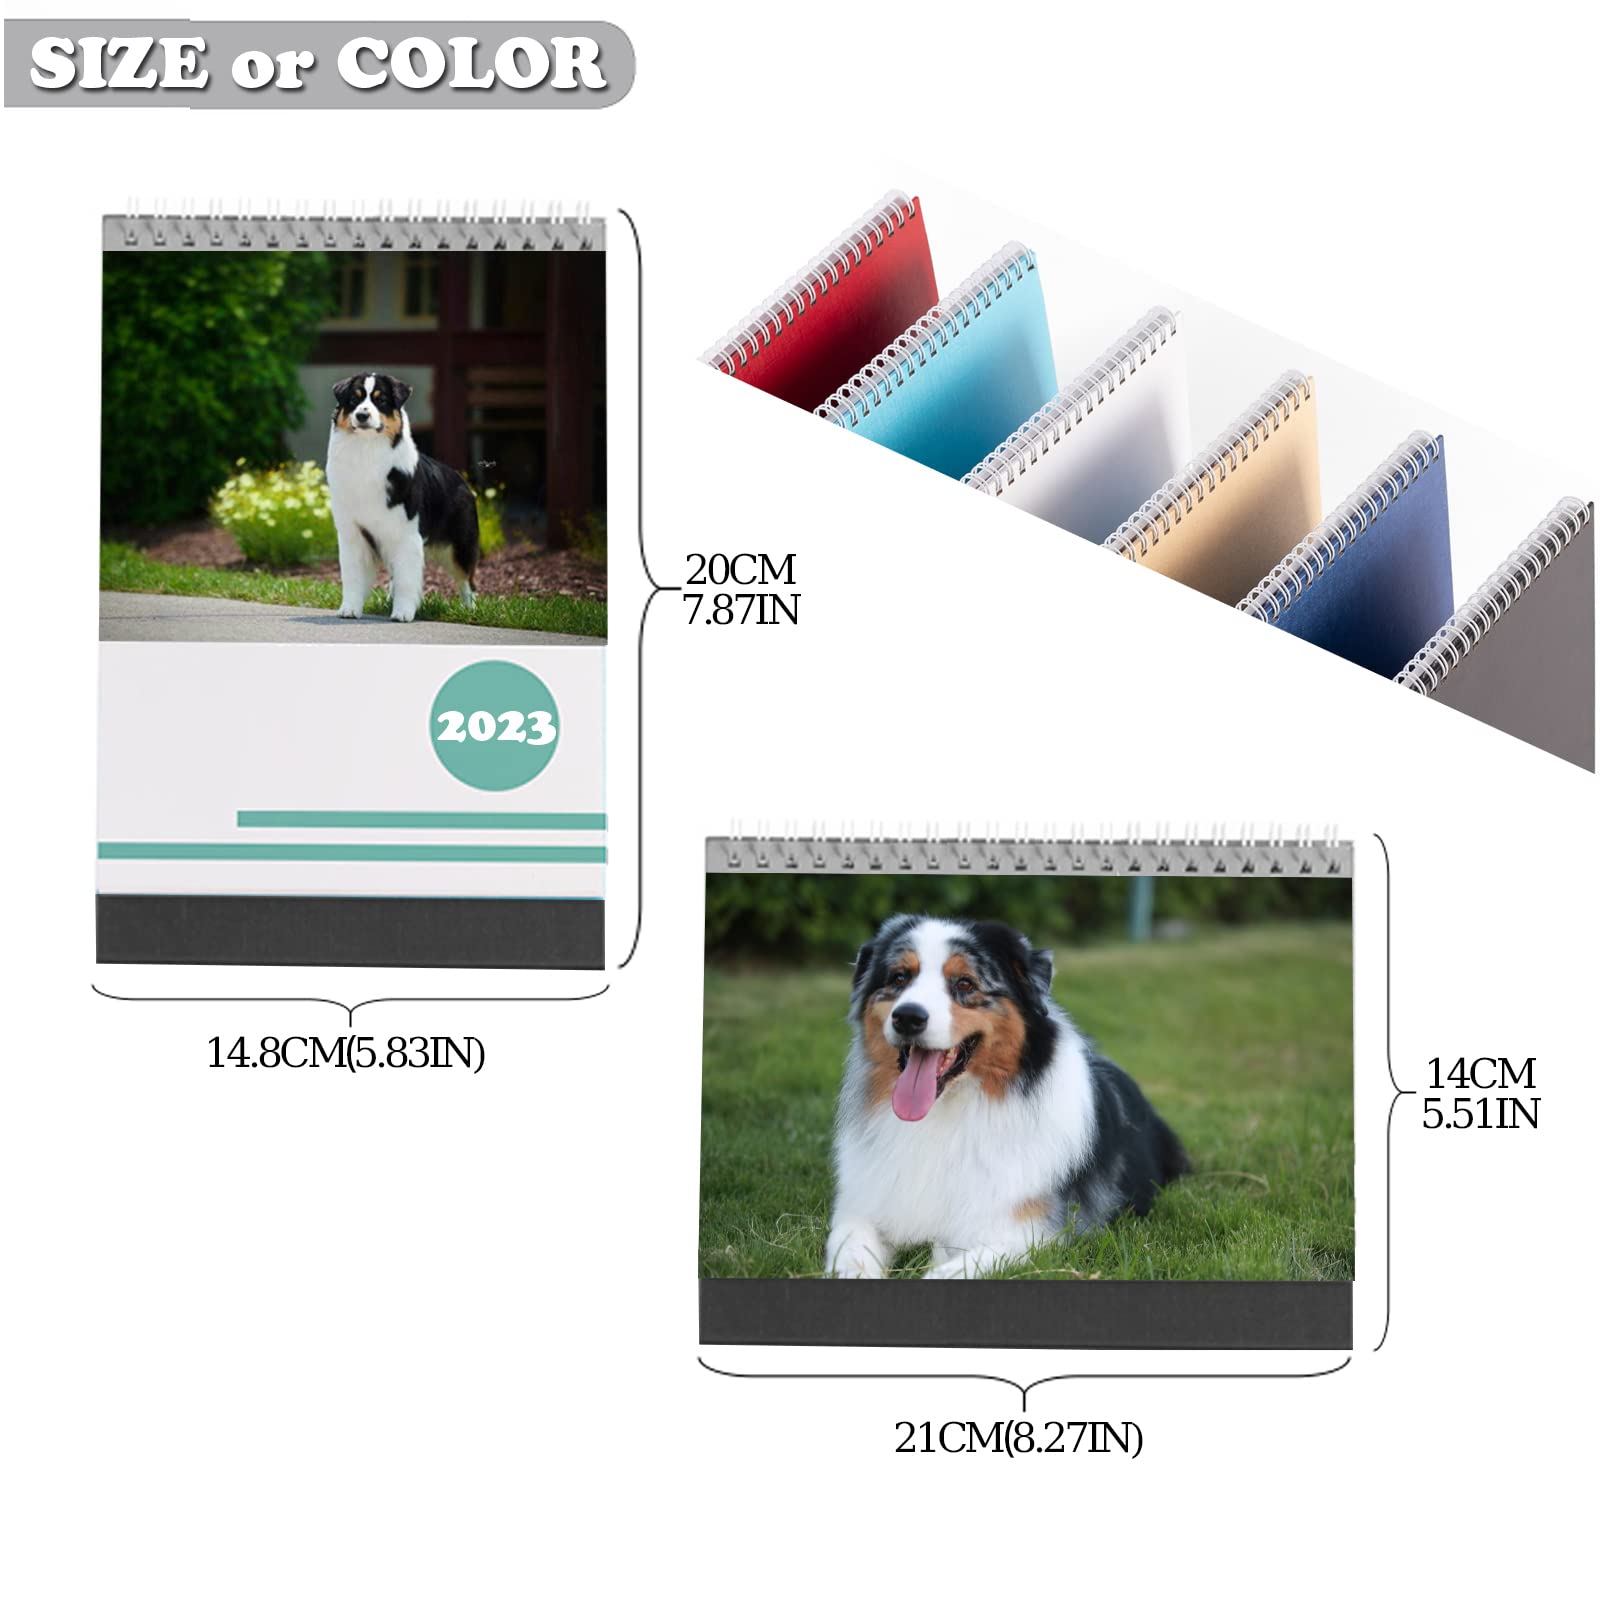 Personalized Desk Custom Calendar 2024 Personalized Calendar with Your Photo/Pet Photo, 13 Pictures Calendar DIY Gifts for School, Office, Home,Wedding Gift